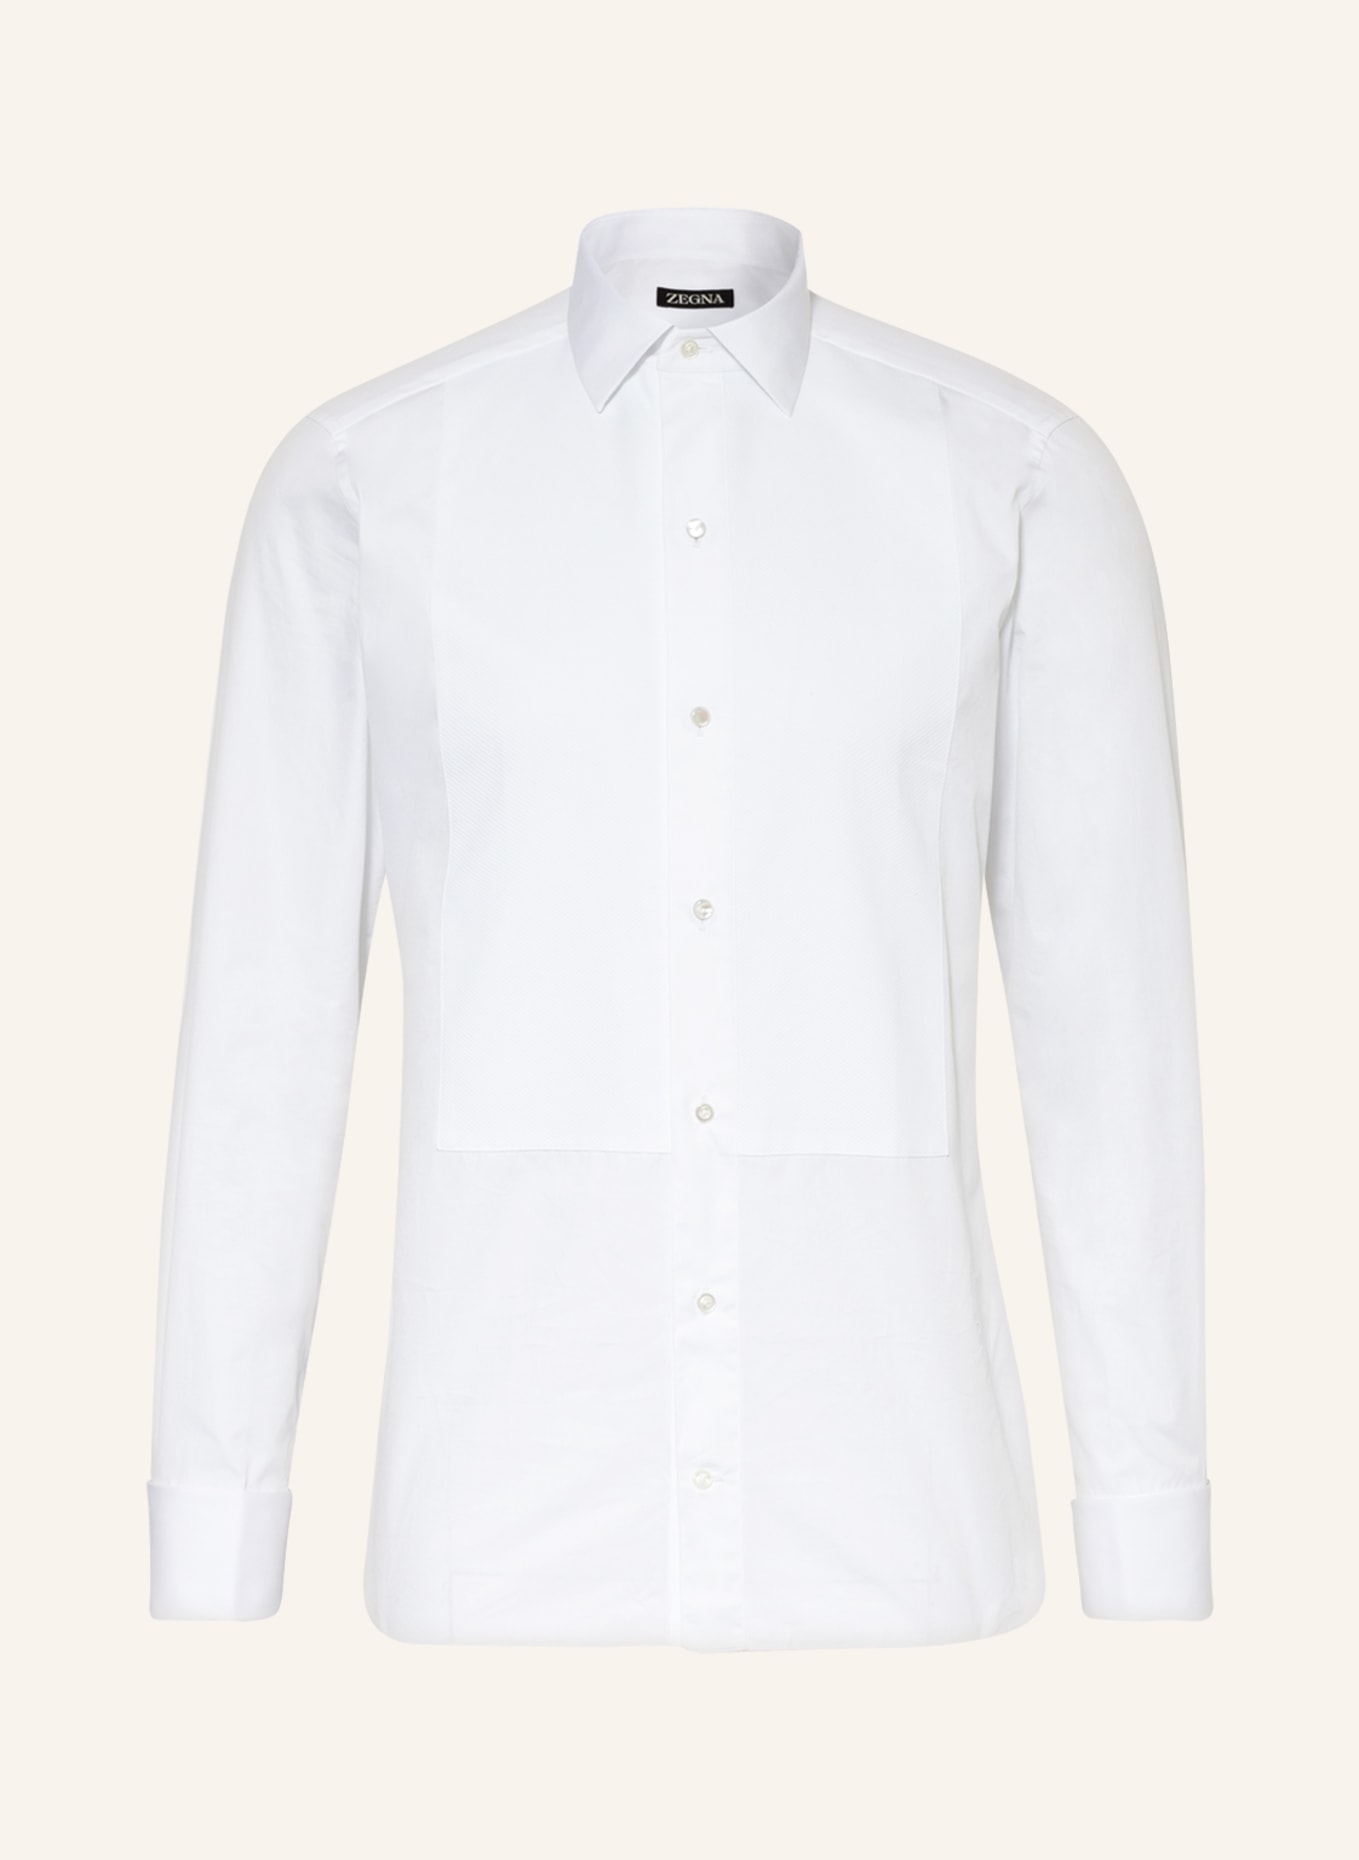 ZEGNA Tuxedo shirt regular fit with French cuffs, Color: WHITE(Image null)